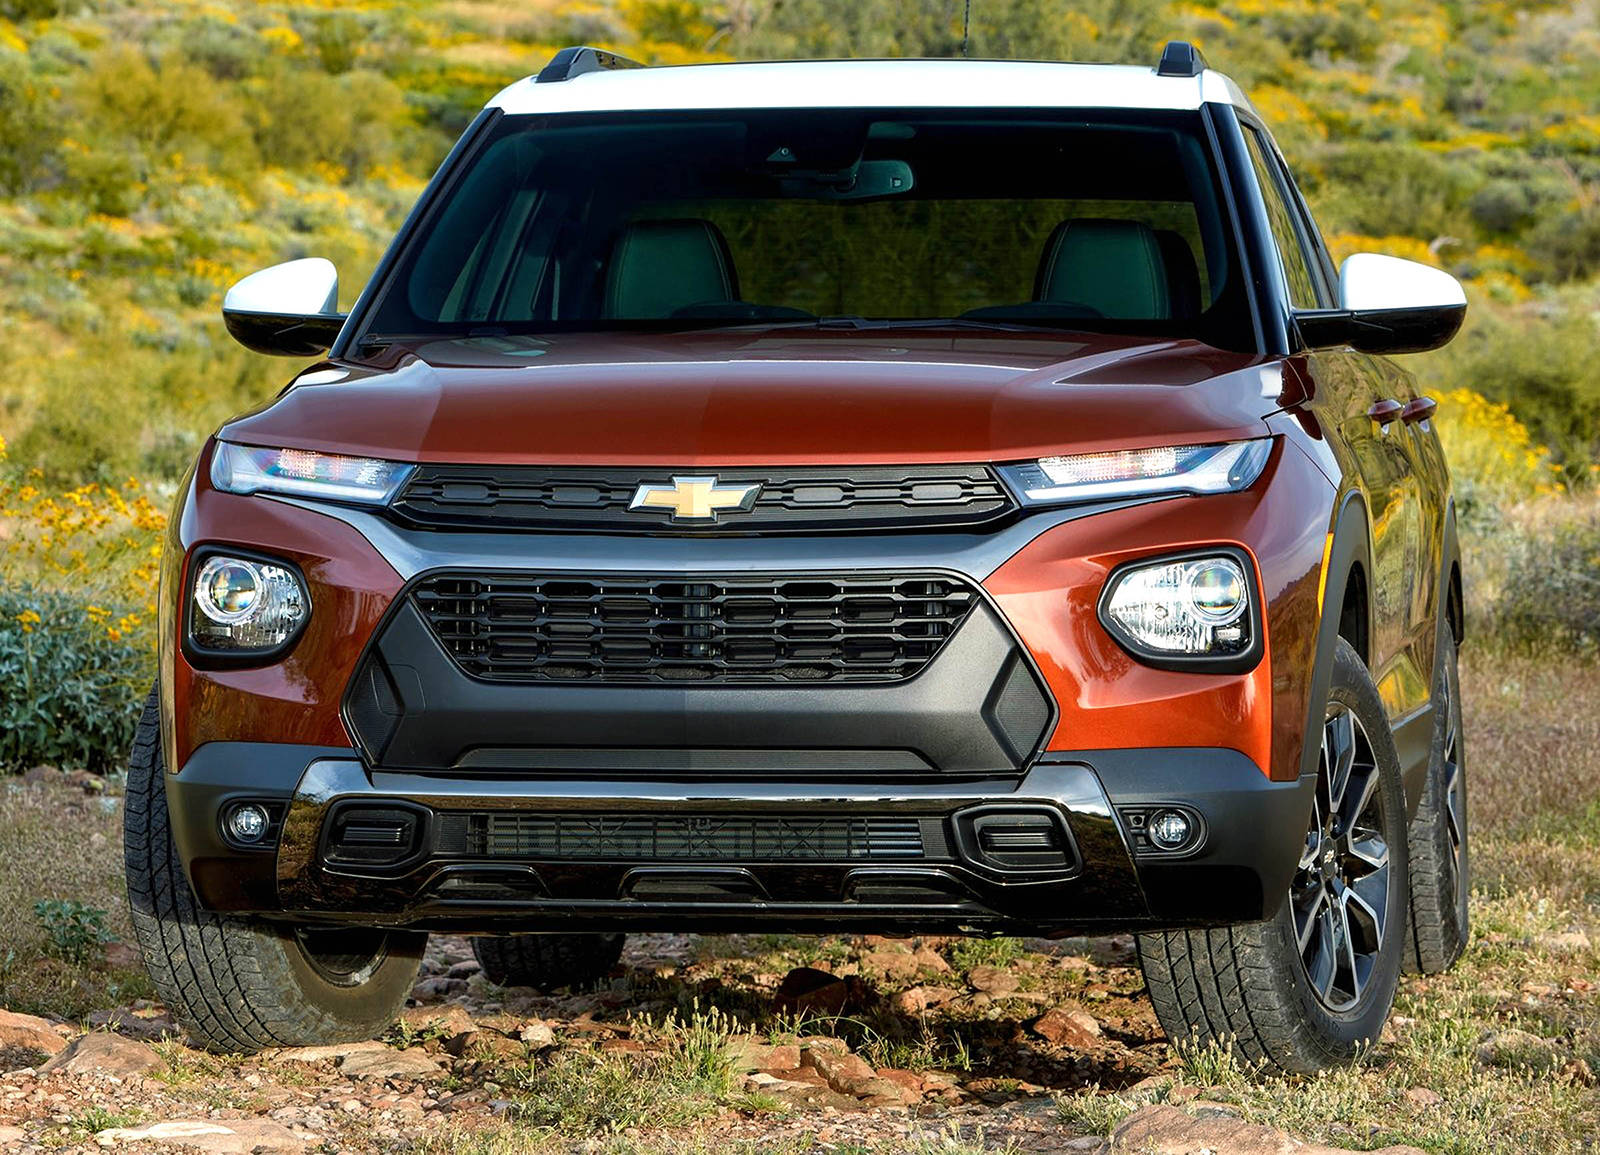 From the front, the Trailblazer displays an oversize grille and rounded hood that’s similar in shape to other vehicles in Chevy’s stable, most notably the bigger Blazer.